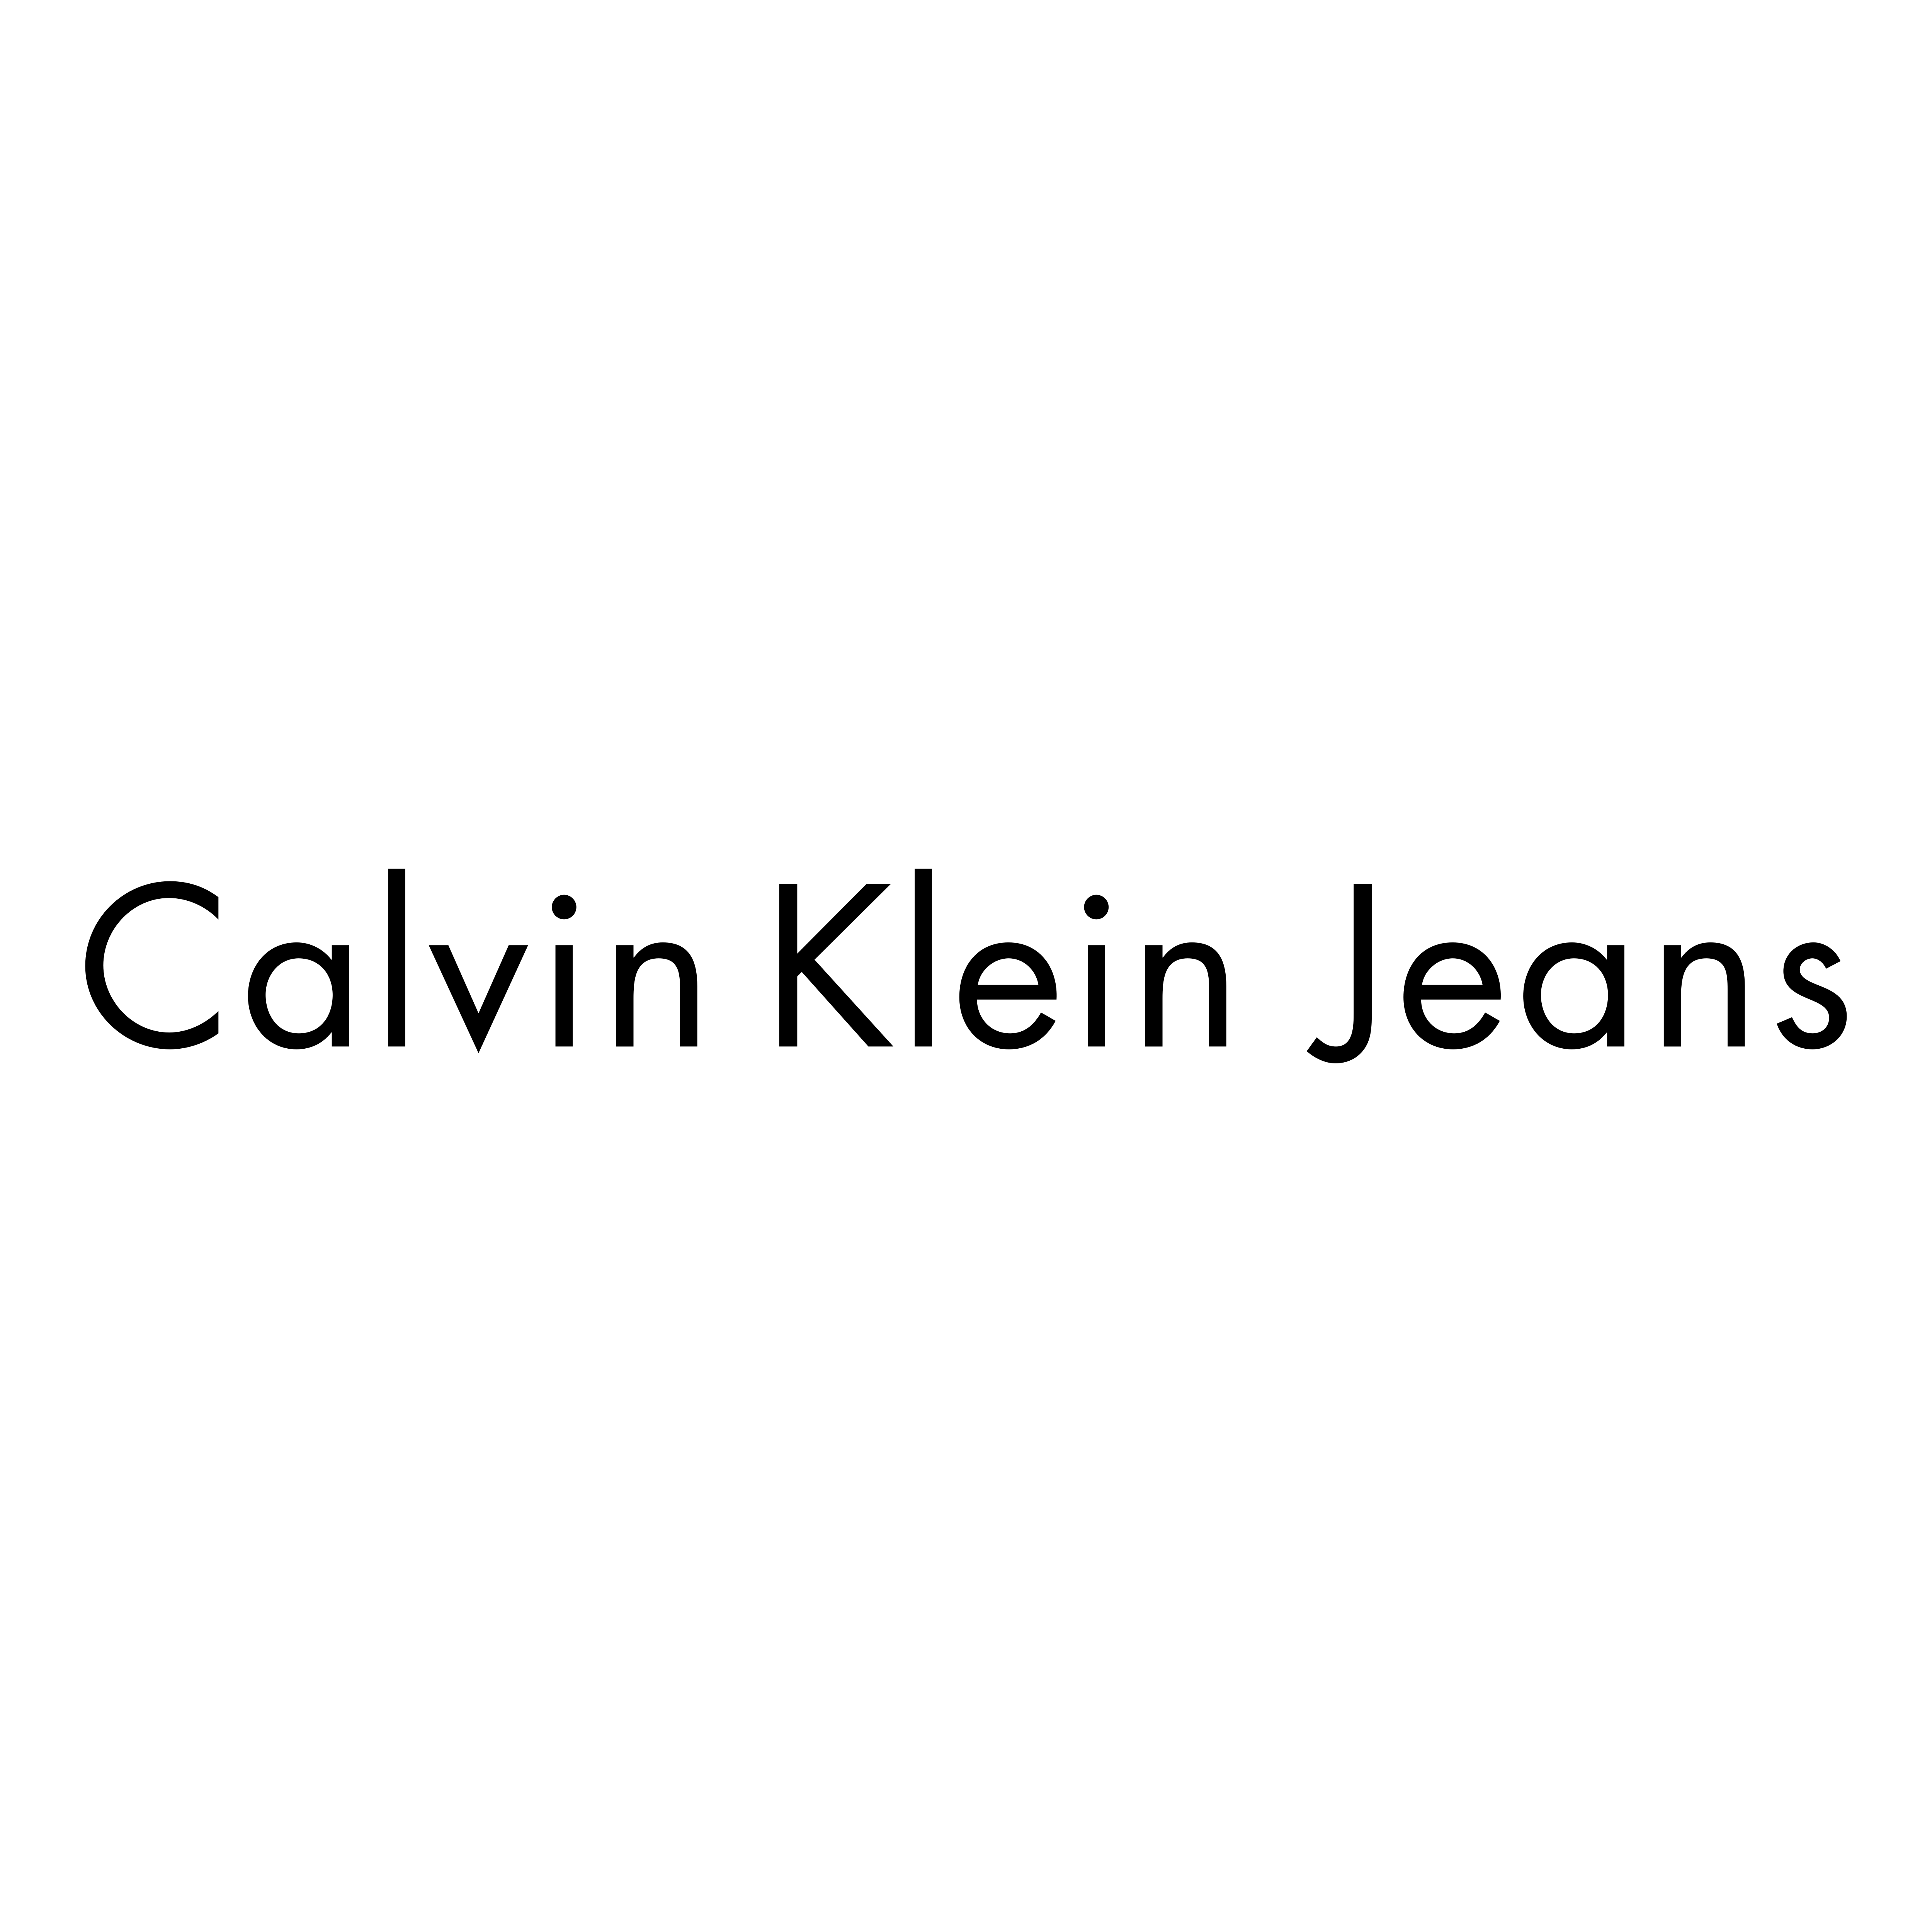 calvin klein jeans font Cheaper Than Retail Price> Buy Clothing ...